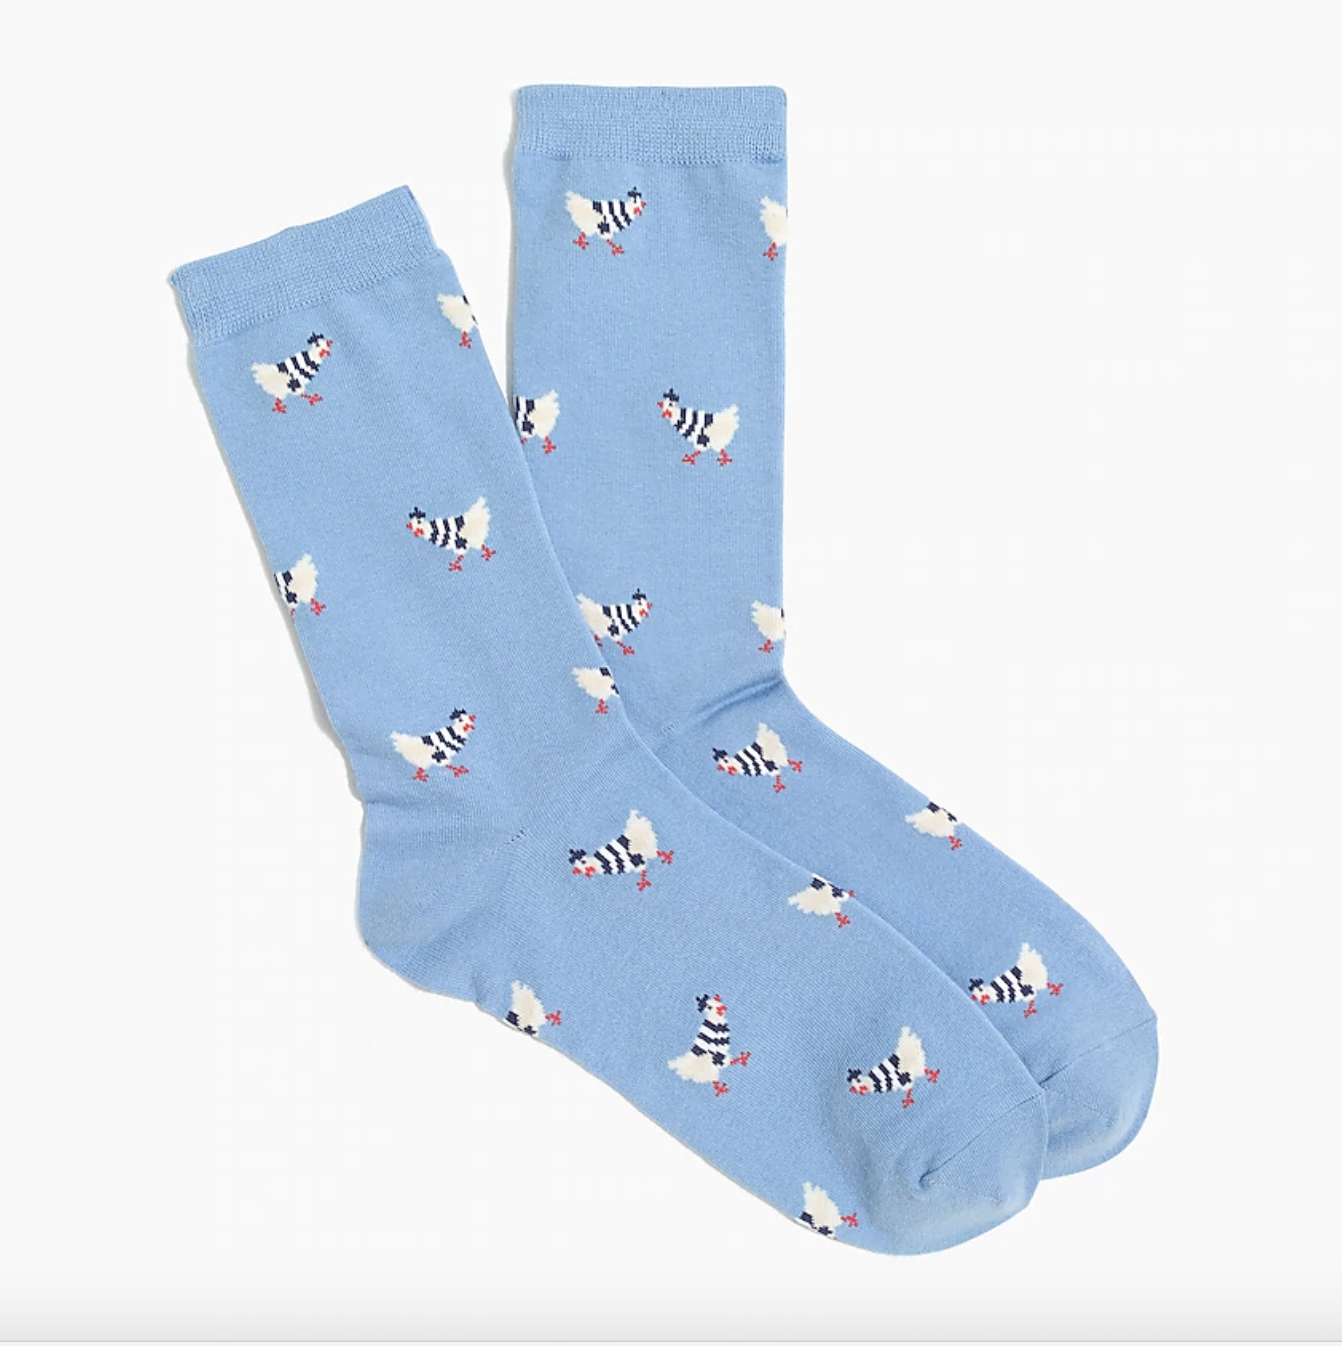 the pale blue socks, decorated with French hens wearing berets 